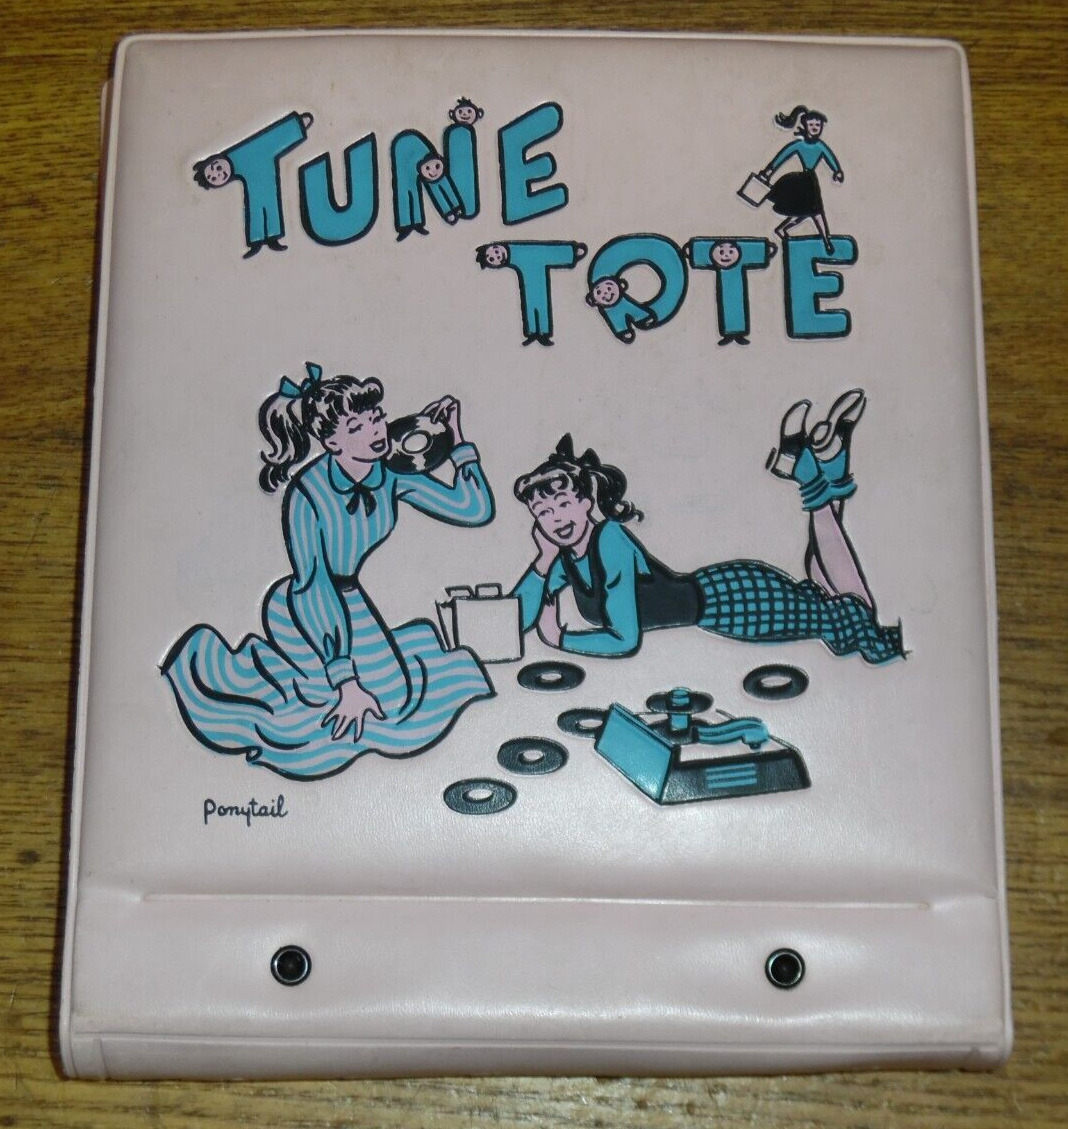 Vintage Pink Ponytail Tune Tote Record Holder